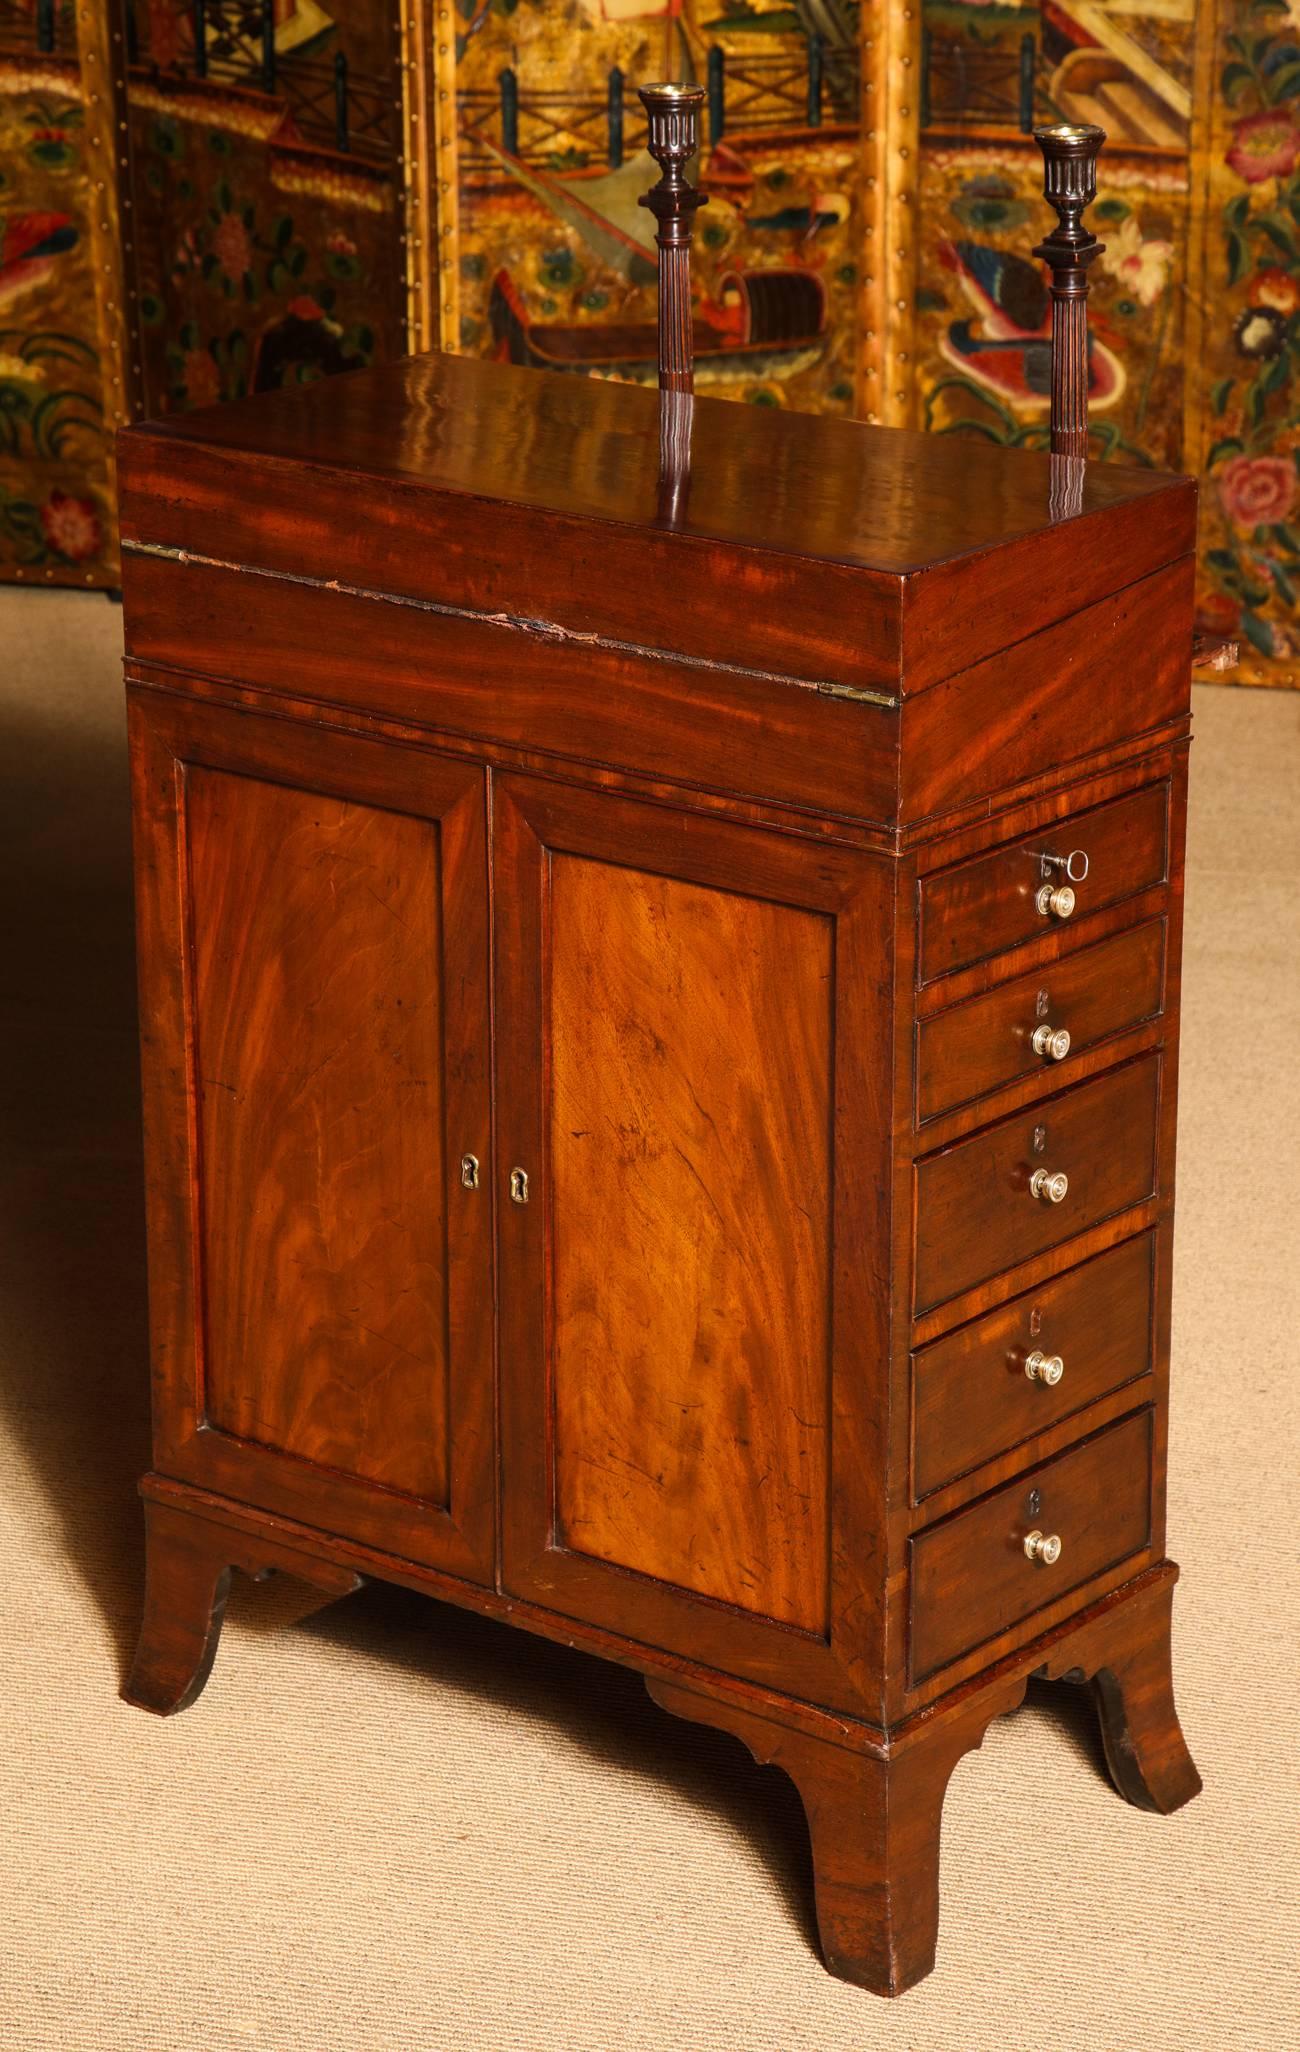 A rare Regency mahogany davenport desk, having a hinged top opening to reveal a leather-lined slanted writing surface with two hinged hidden compartments. The case designed as a double sided cupboard with faux doors. The sides alternating with one